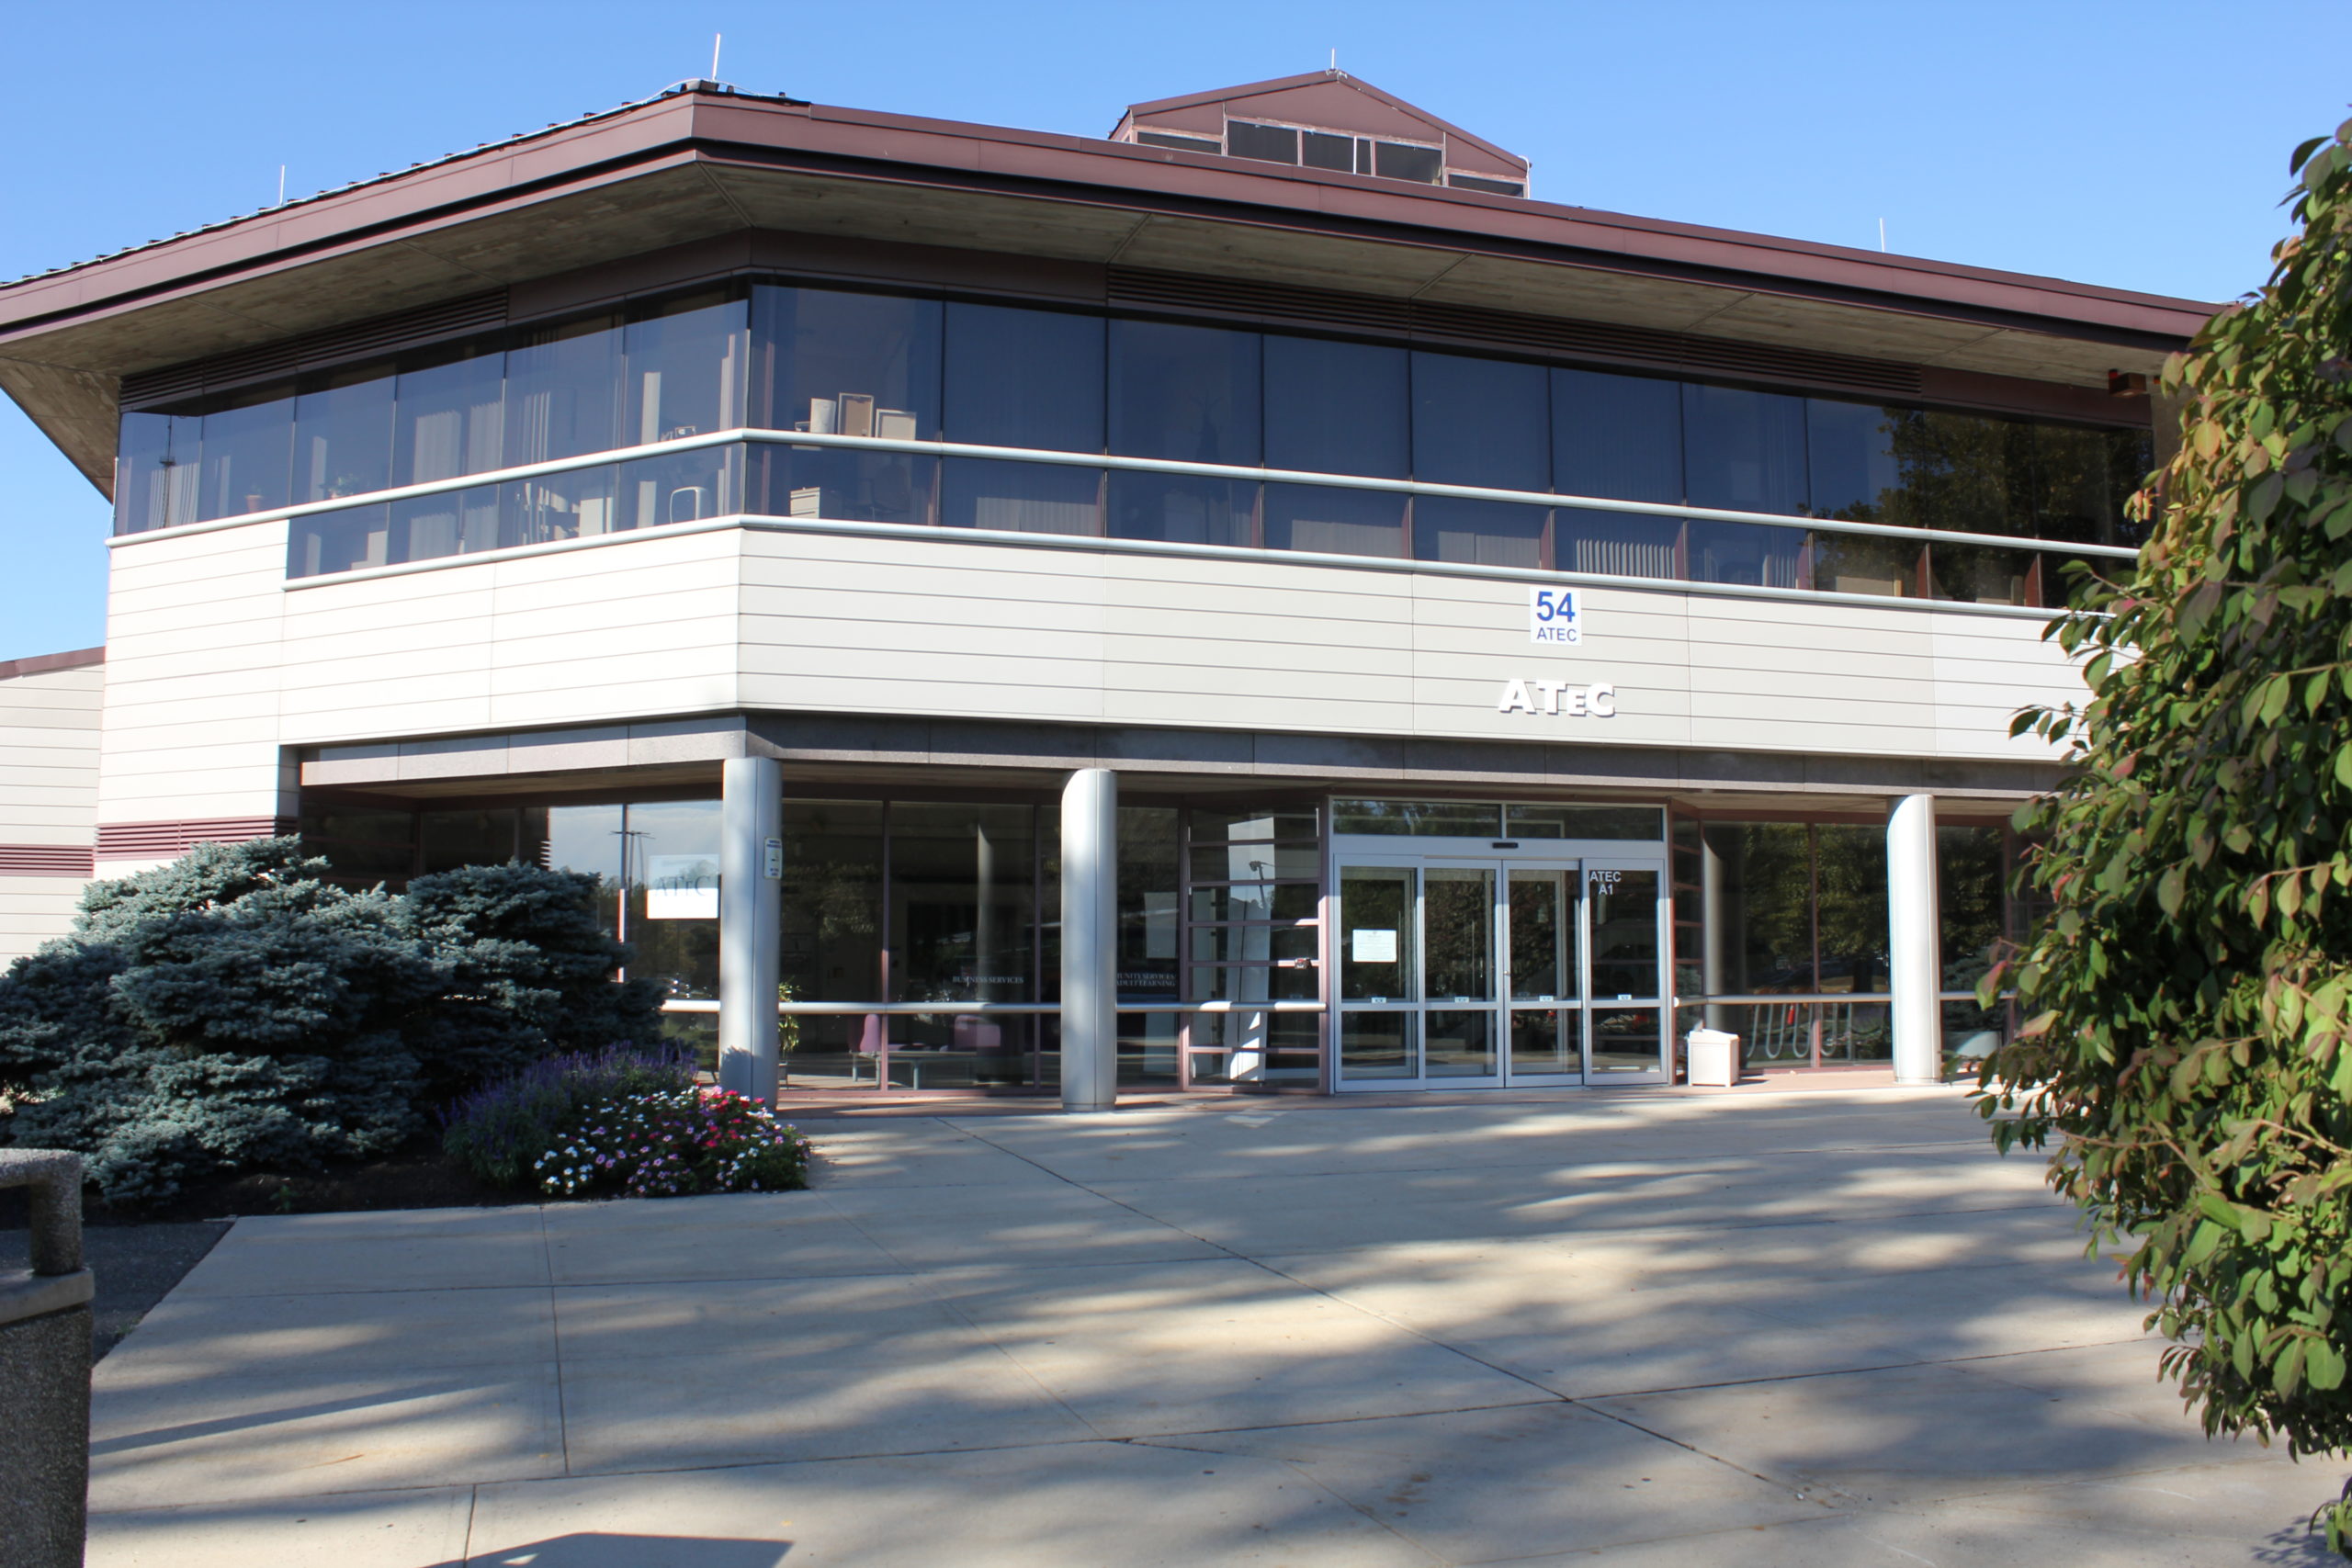 Building on Lincroft campus of Brookdale Community College.